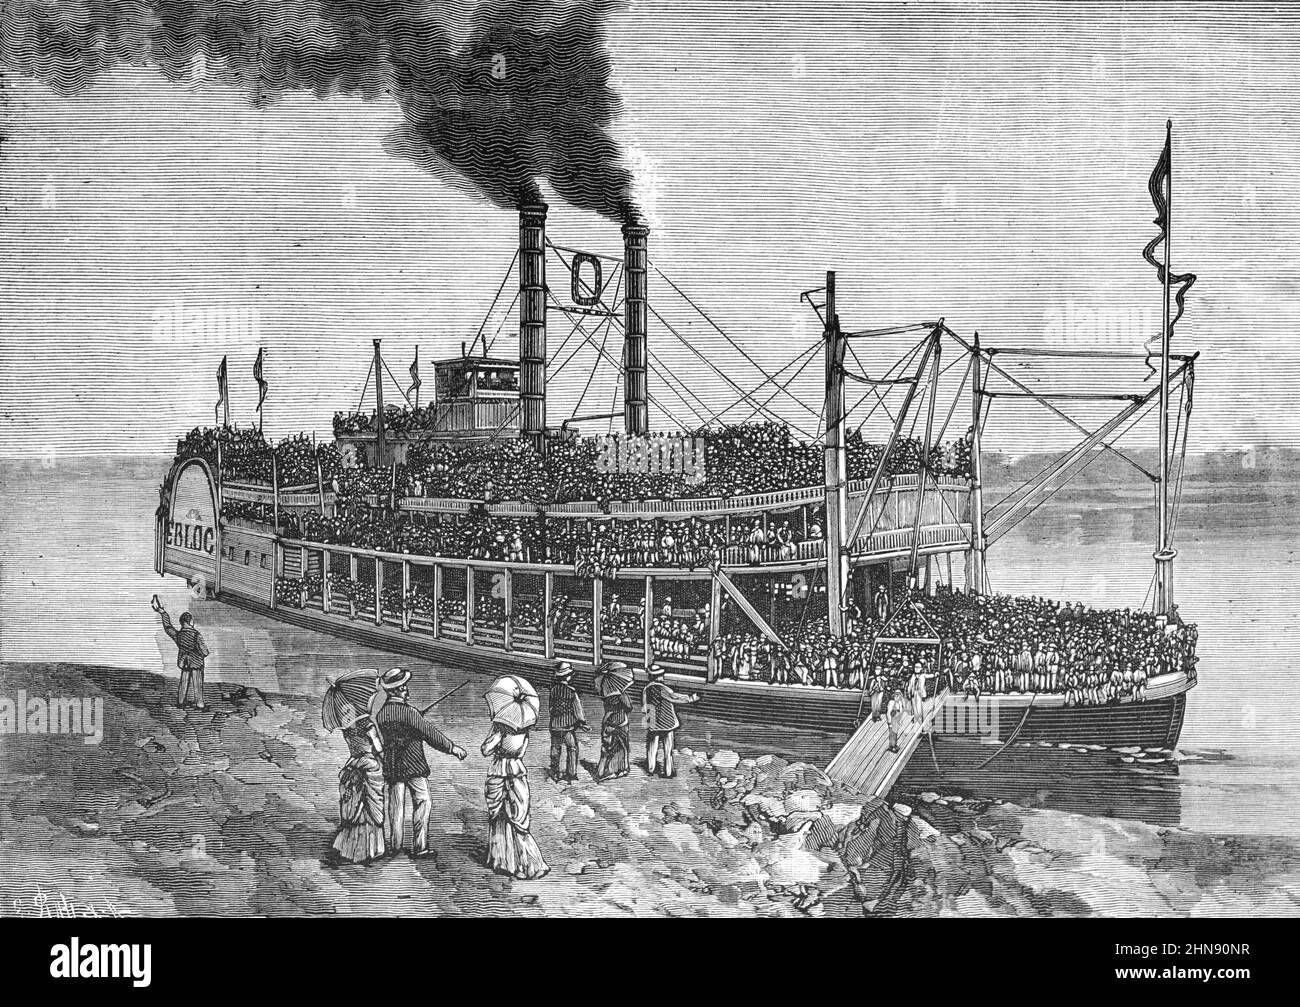 Passengers on a Steamboat or Paddle Steamer Boat on Ohio River United States of America or USA. Vintage Illustration or Engraving 1882 Stock Photo